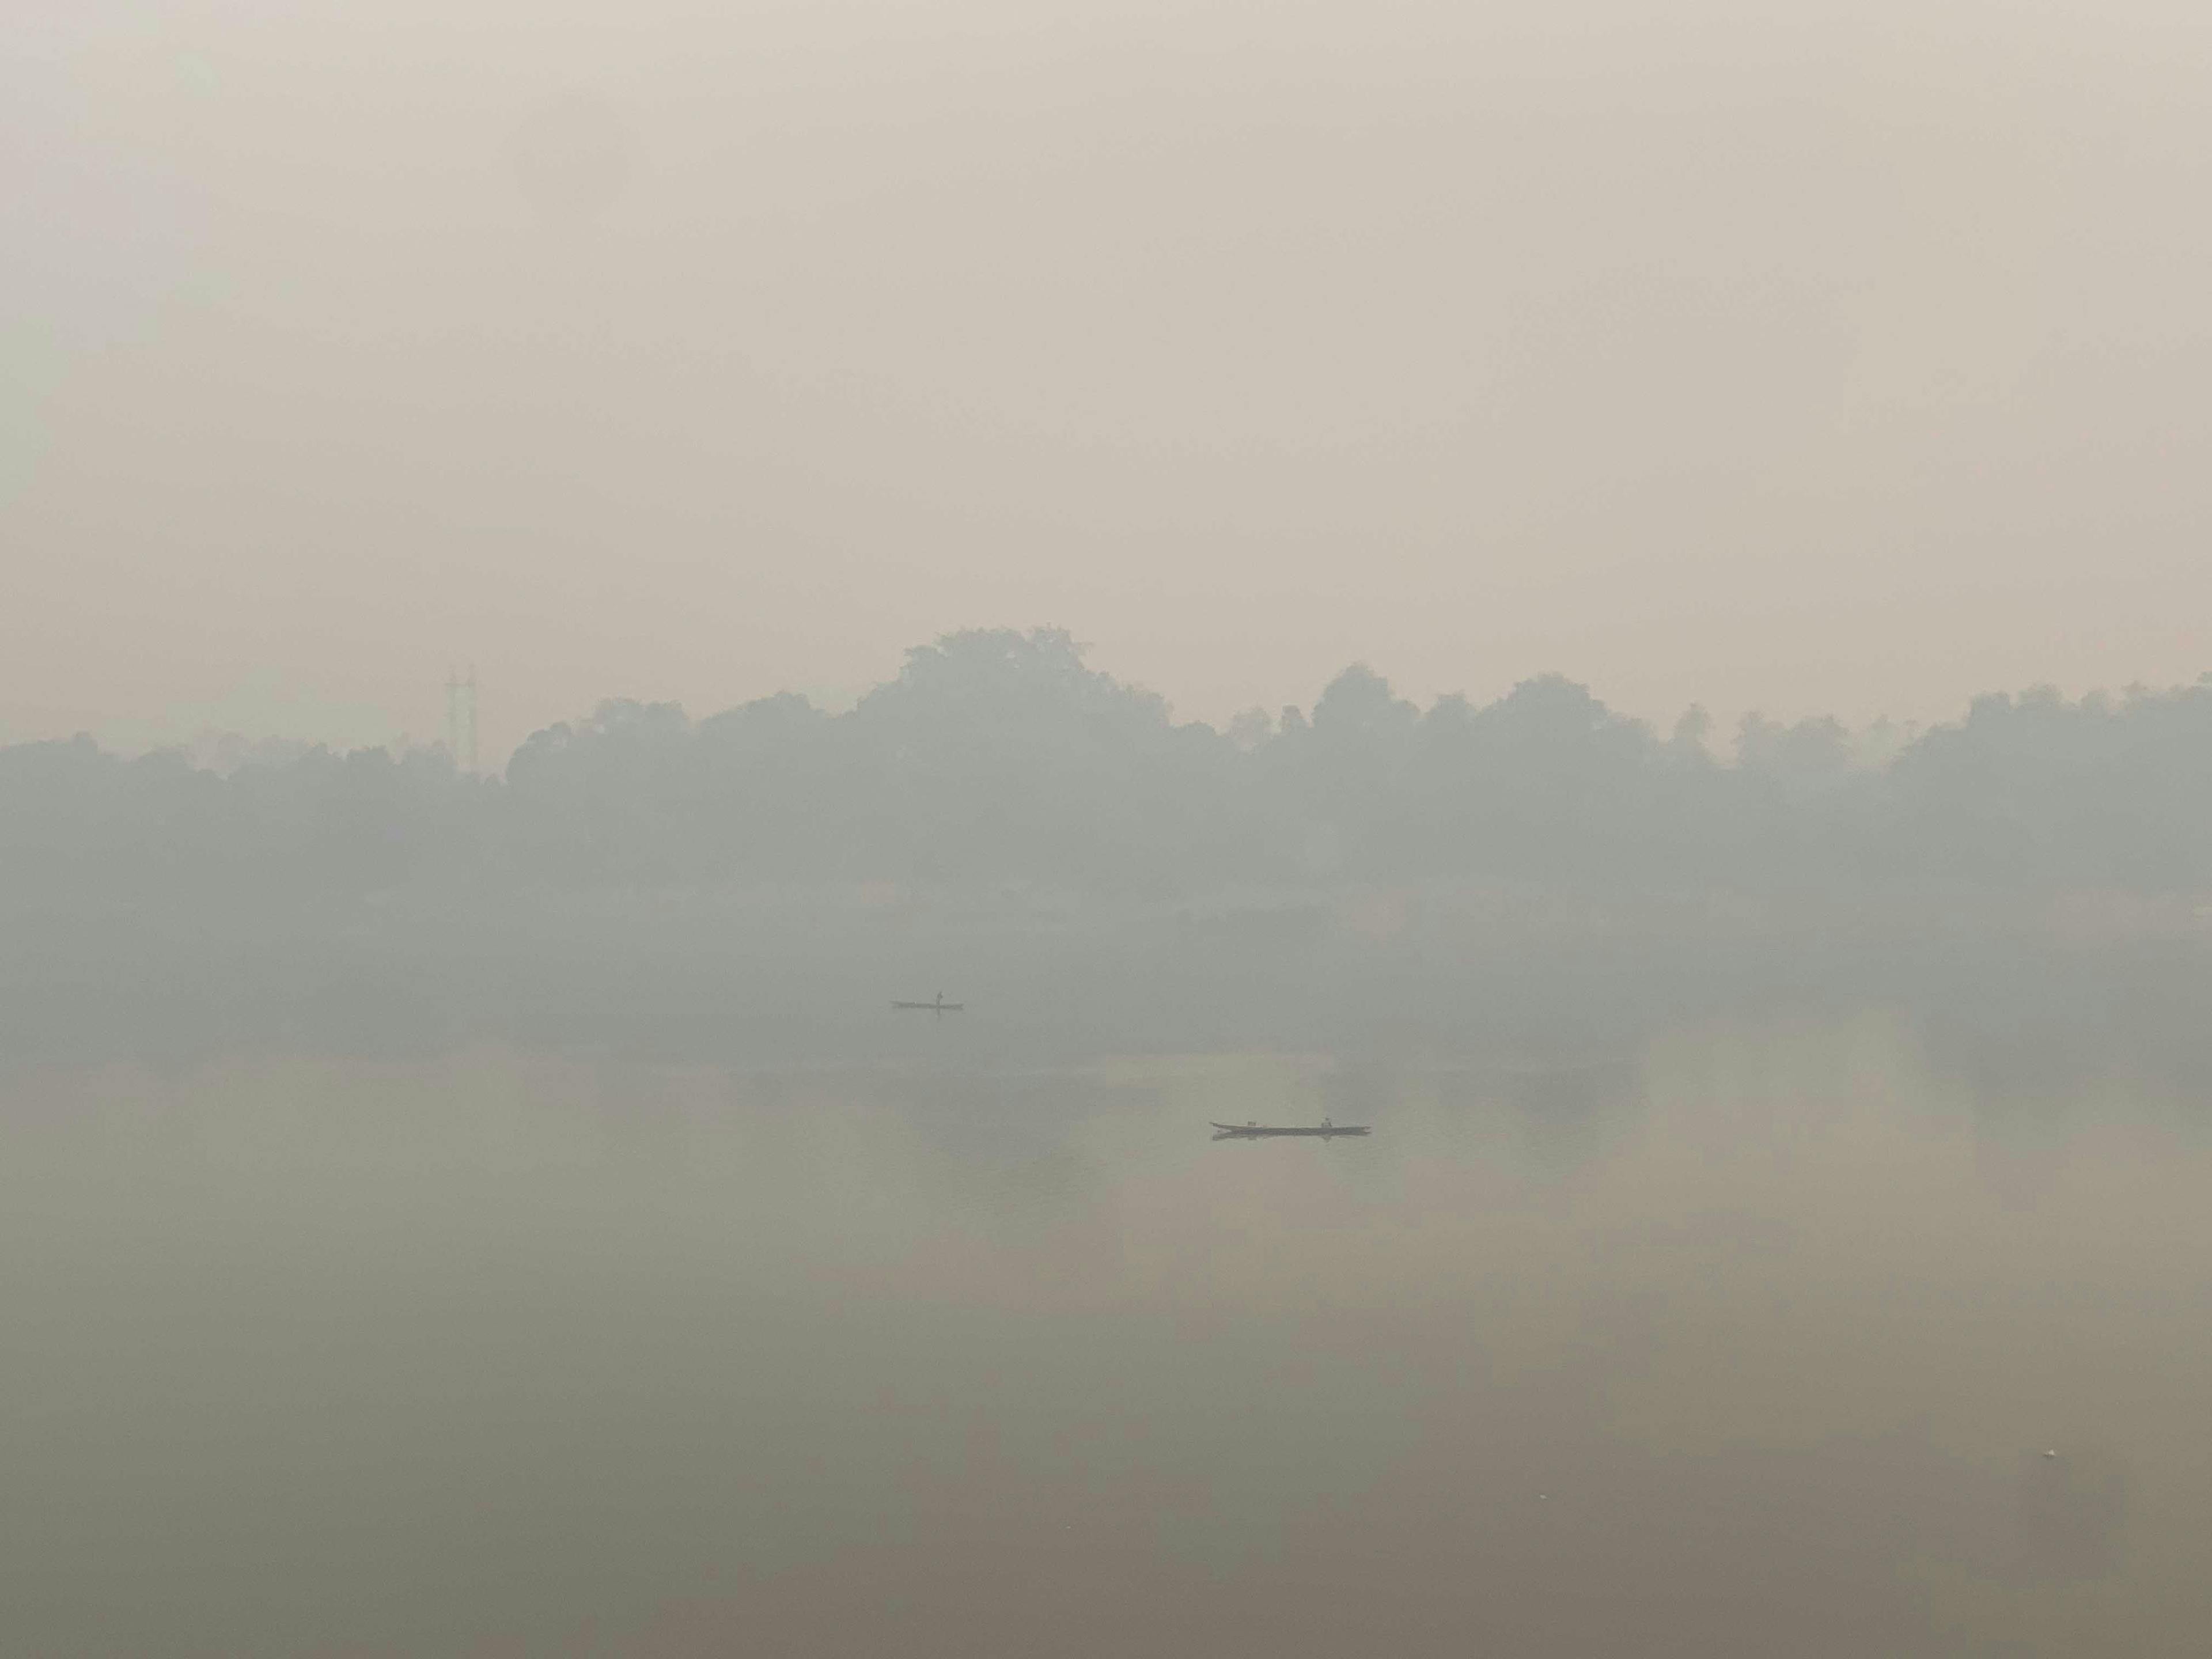 Mekong River in Luang Prabhang, covered by smoke